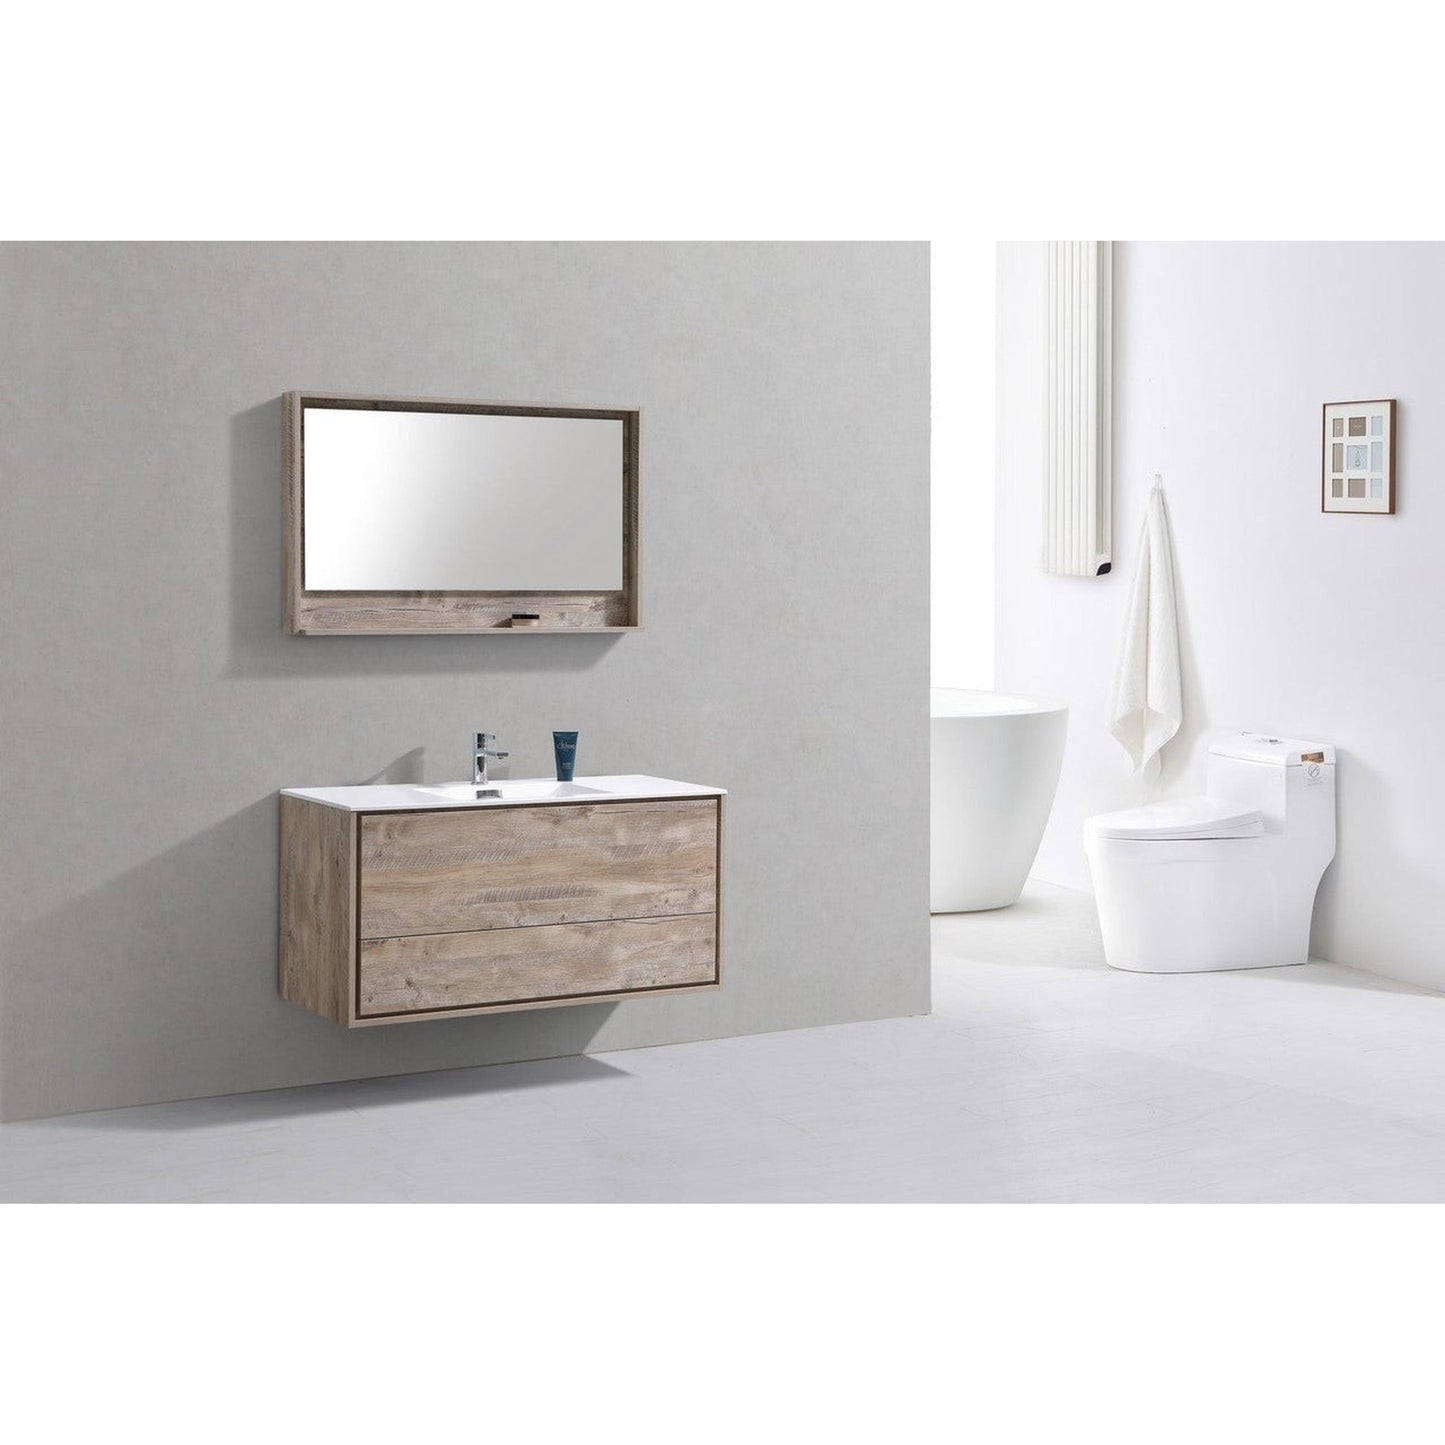 KubeBath DeLusso 48" Nature Wood Wall-Mounted Modern Bathroom Vanity With Single Integrated Acrylic Sink With Overflow and 48" Wood Framed Mirror With Shelf